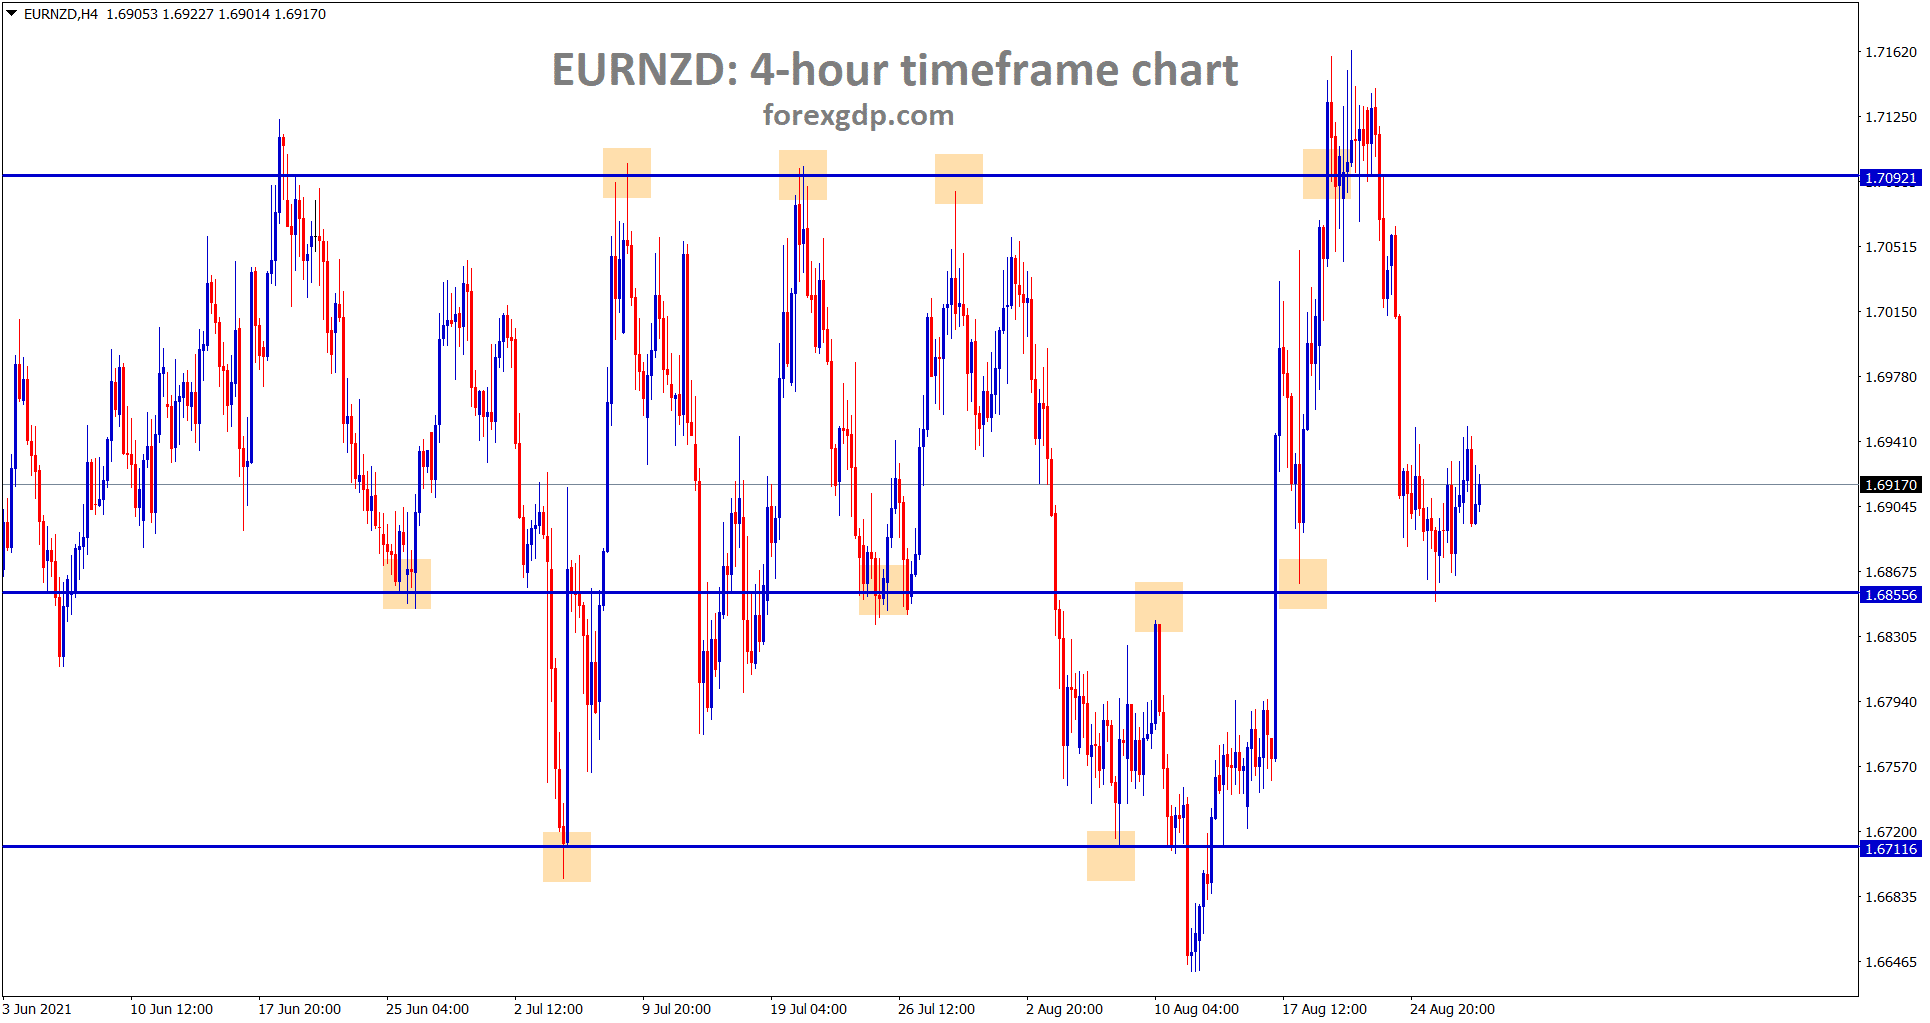 EURNZD rebound shortly from the minor support area